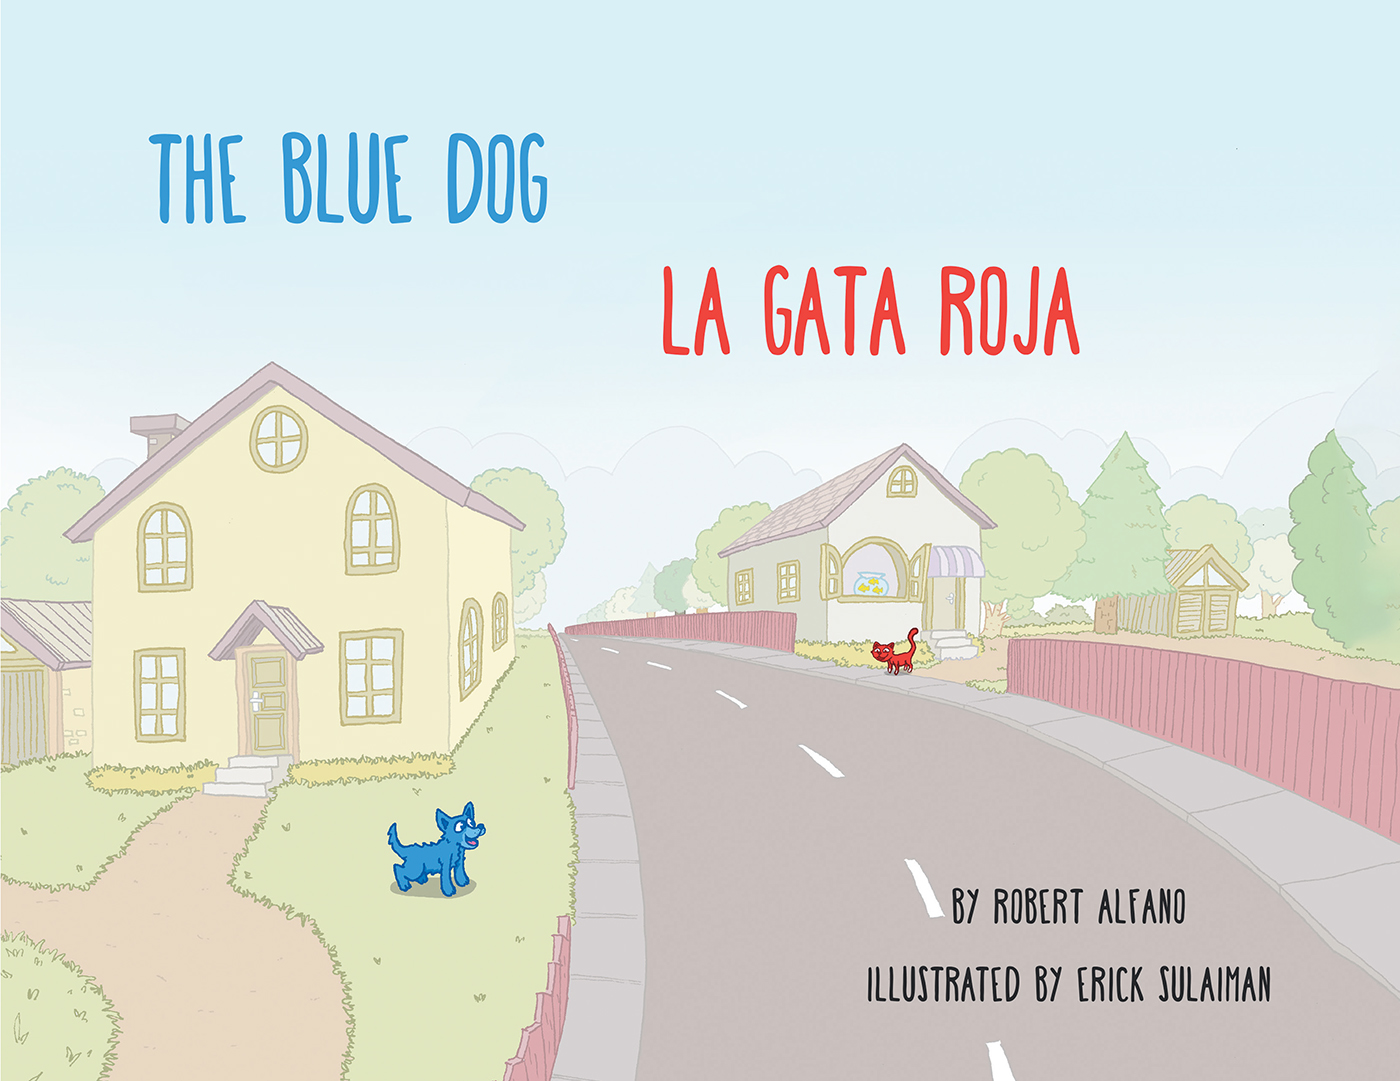 Author Robert Alfano’s New Book, “The Blue Dog, la Gata Roja,” is a Charming Tale of a Cat and Dog Who Speak Different Languages and Become Close Friends